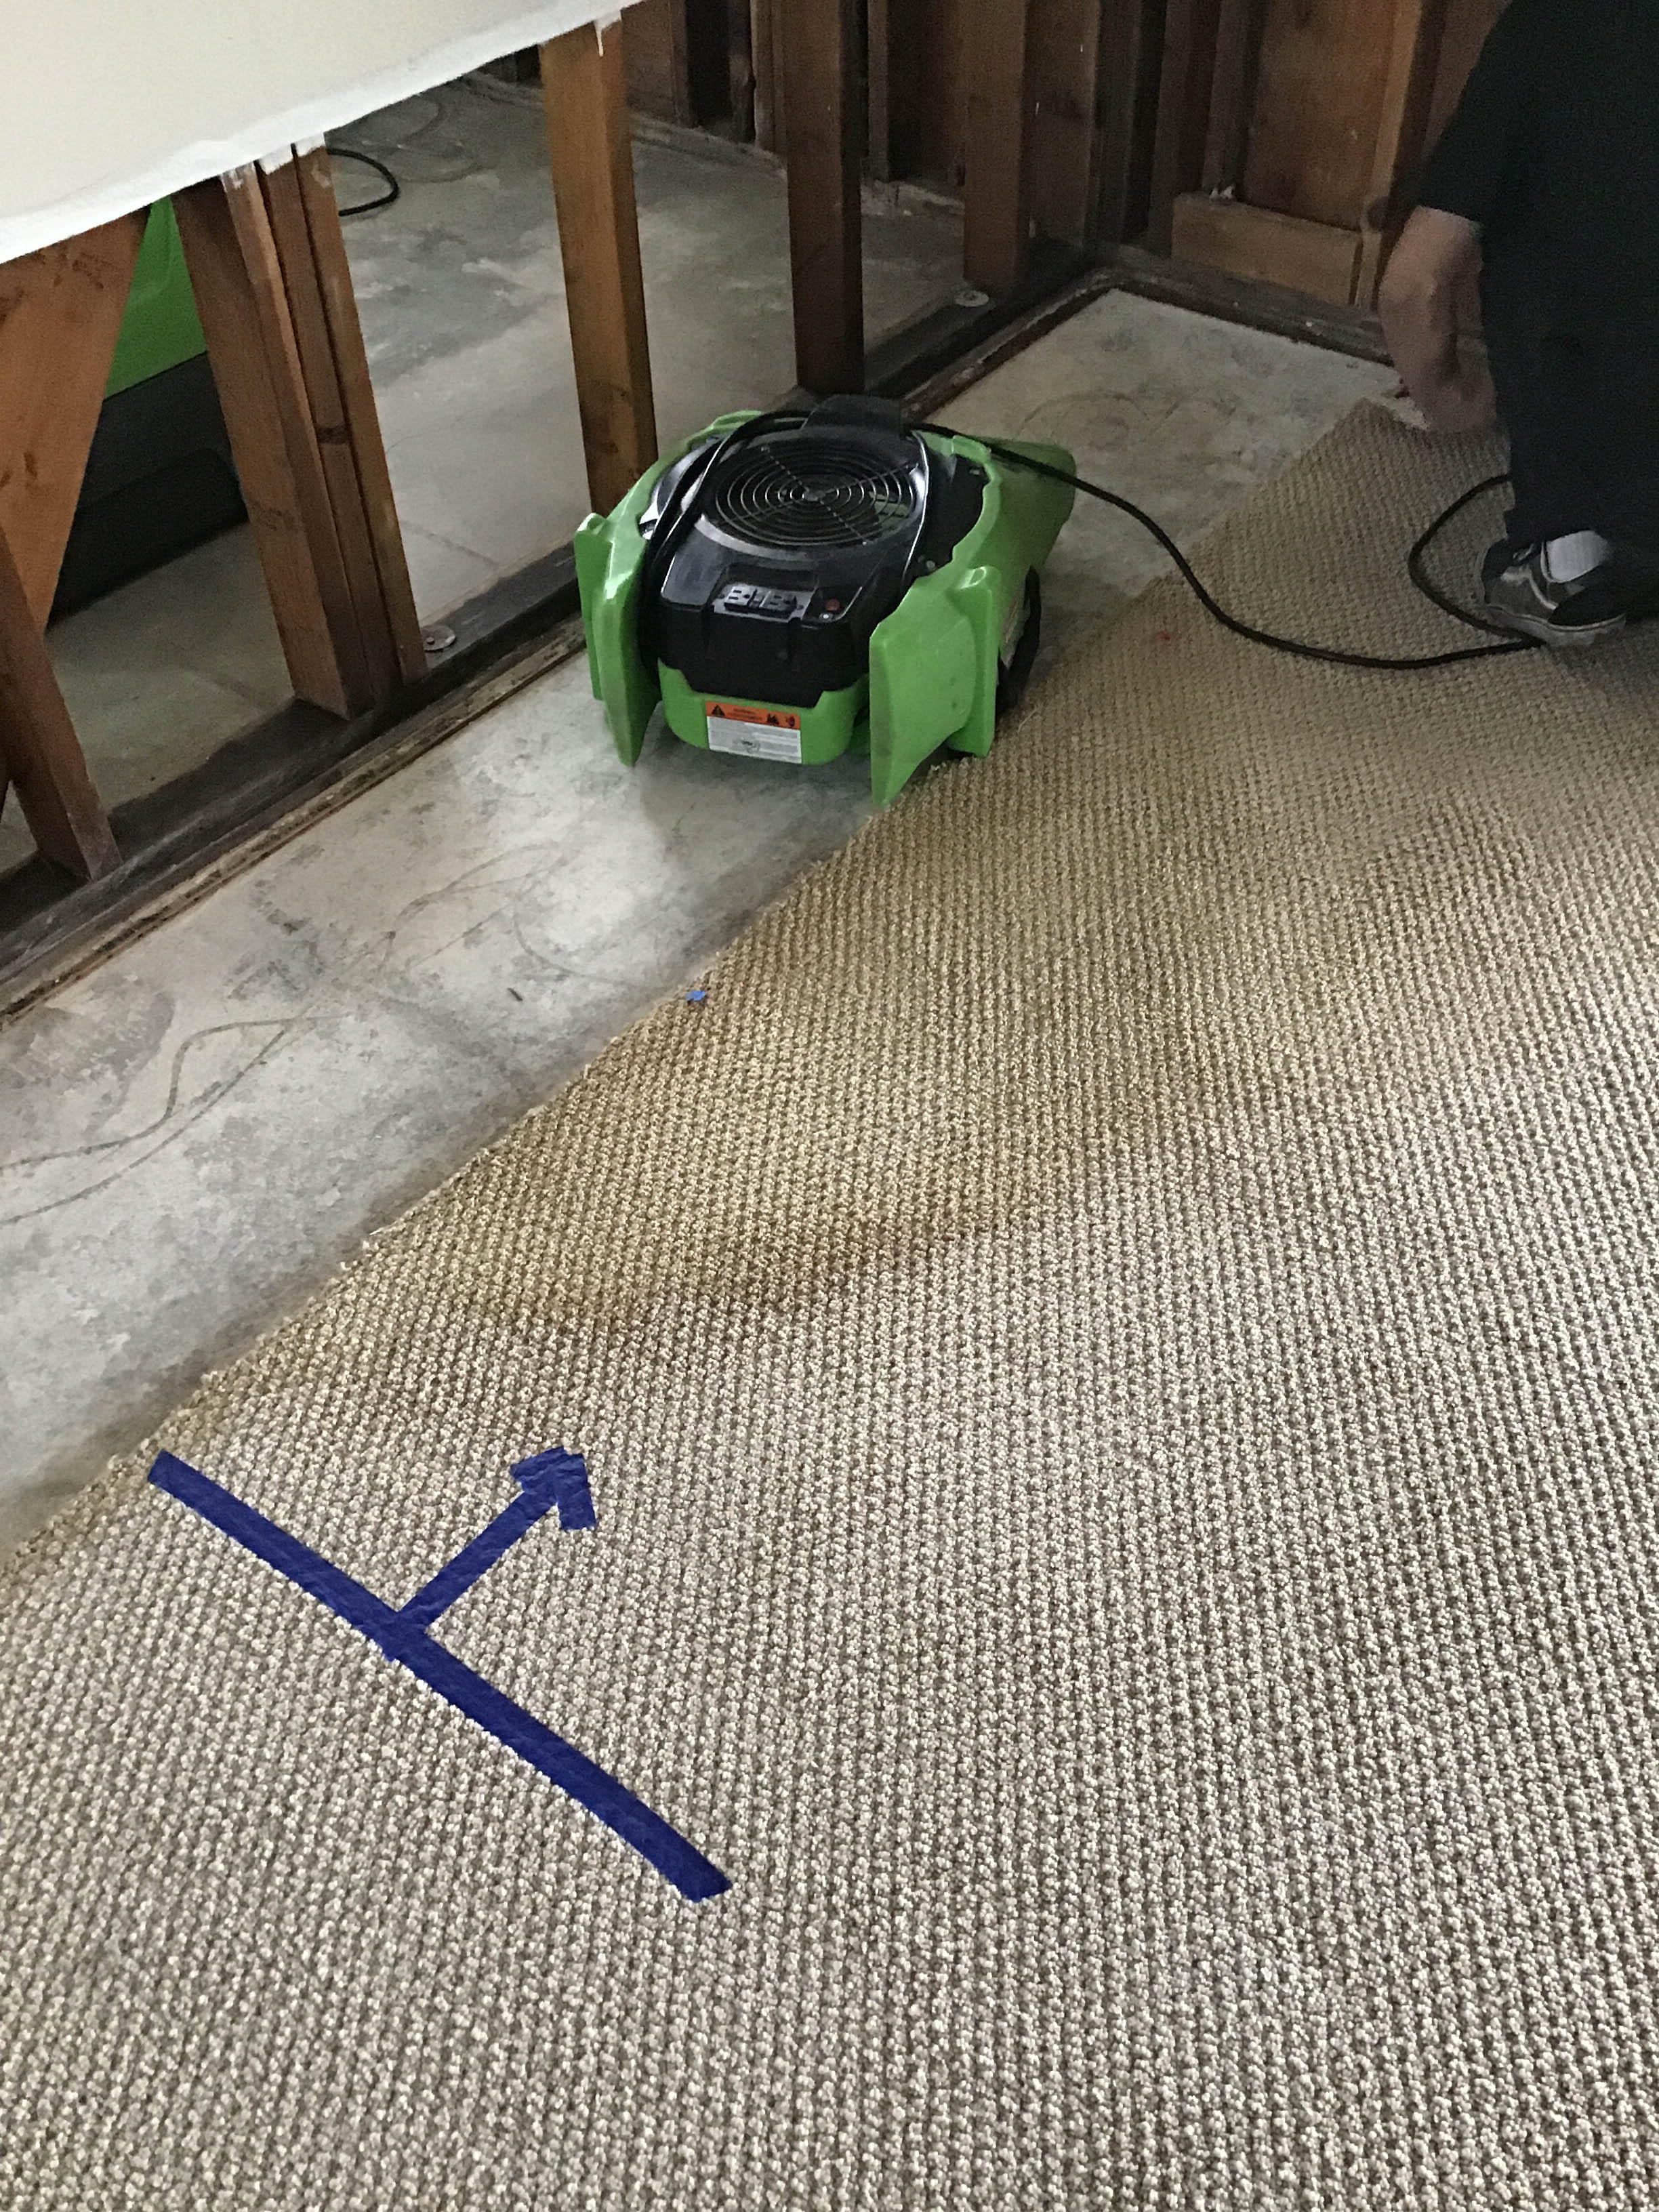 When water damages your home, our team is here to help you get it cleaned and dry.